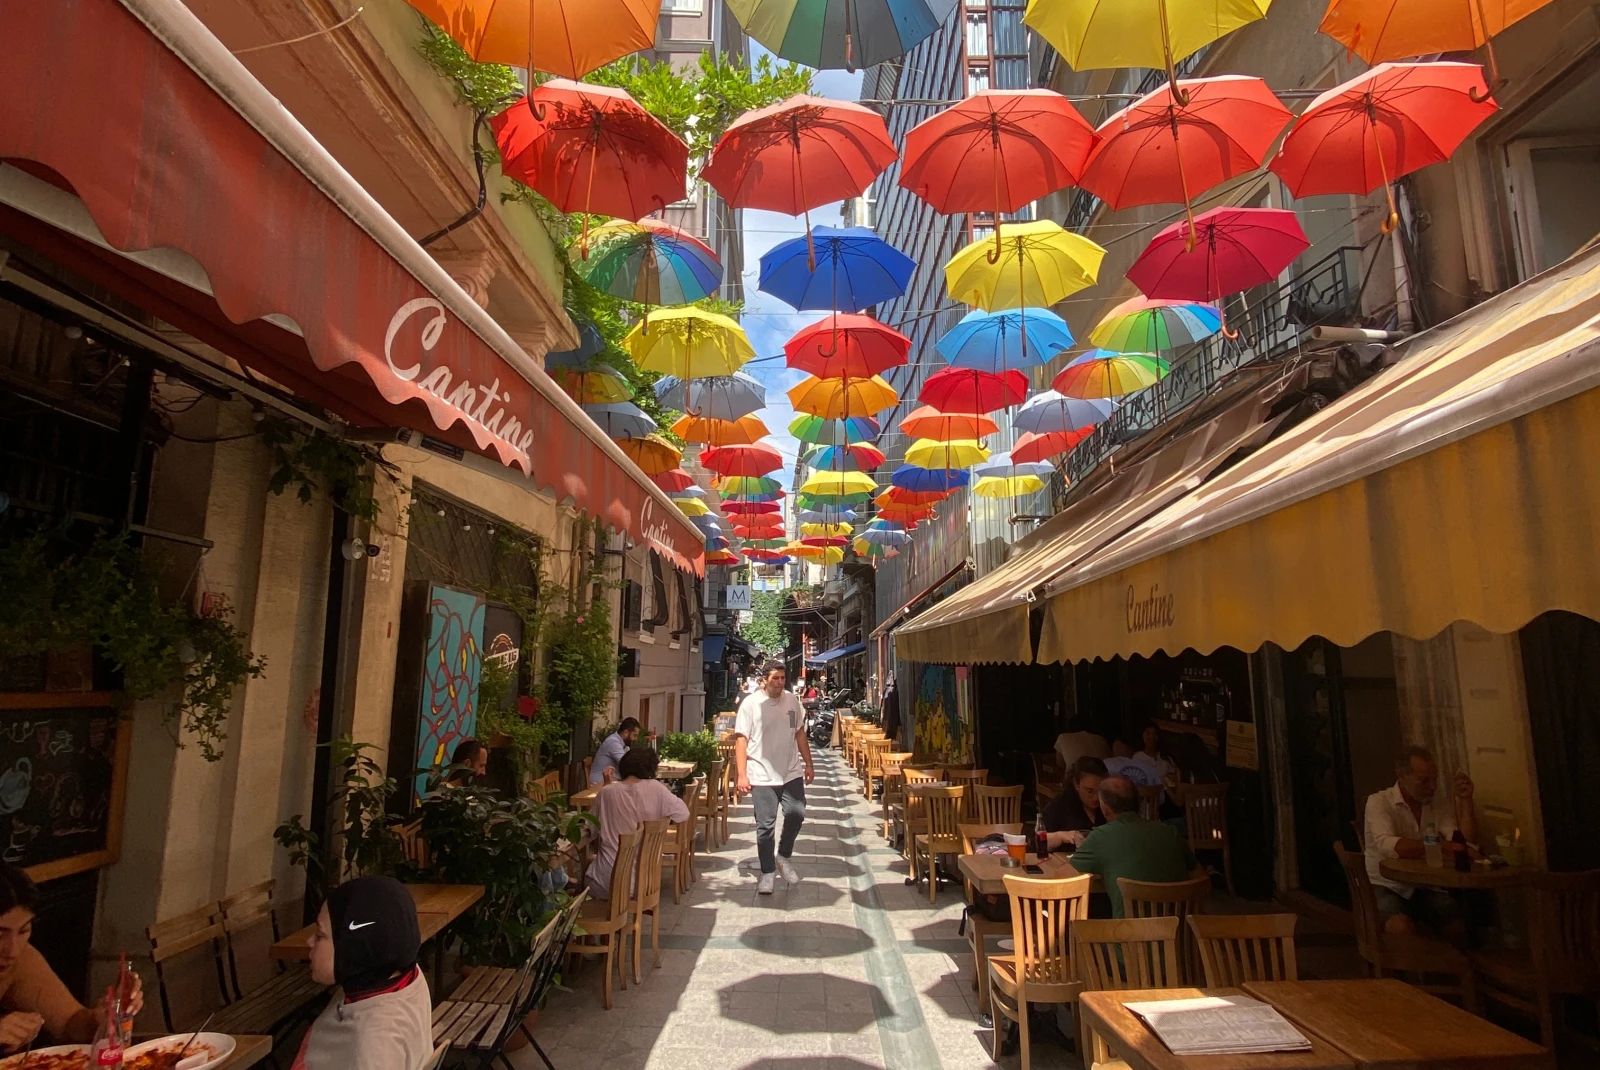 colorful umbrellas over an alley with tables and chairs